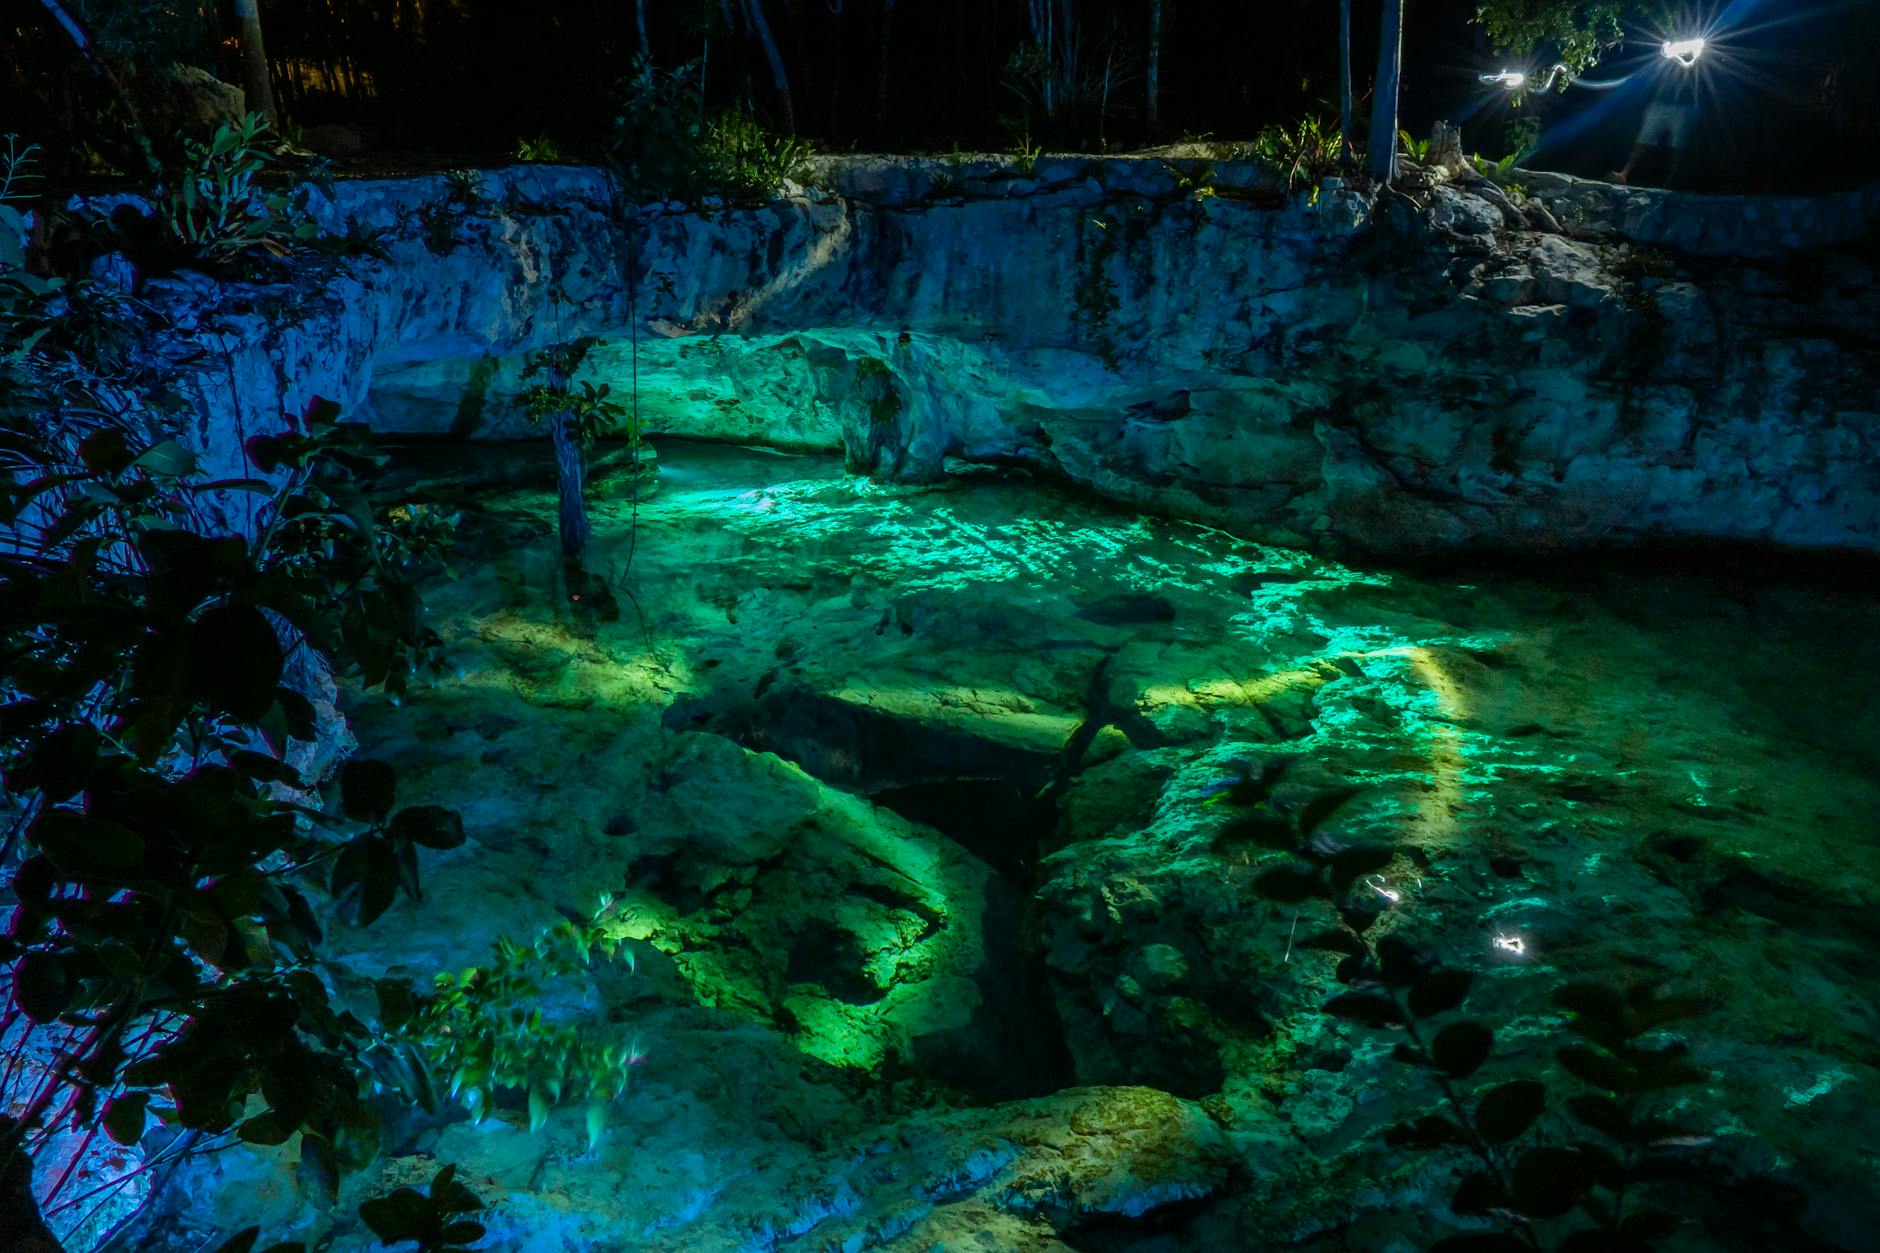 the cave is lit up with green lights